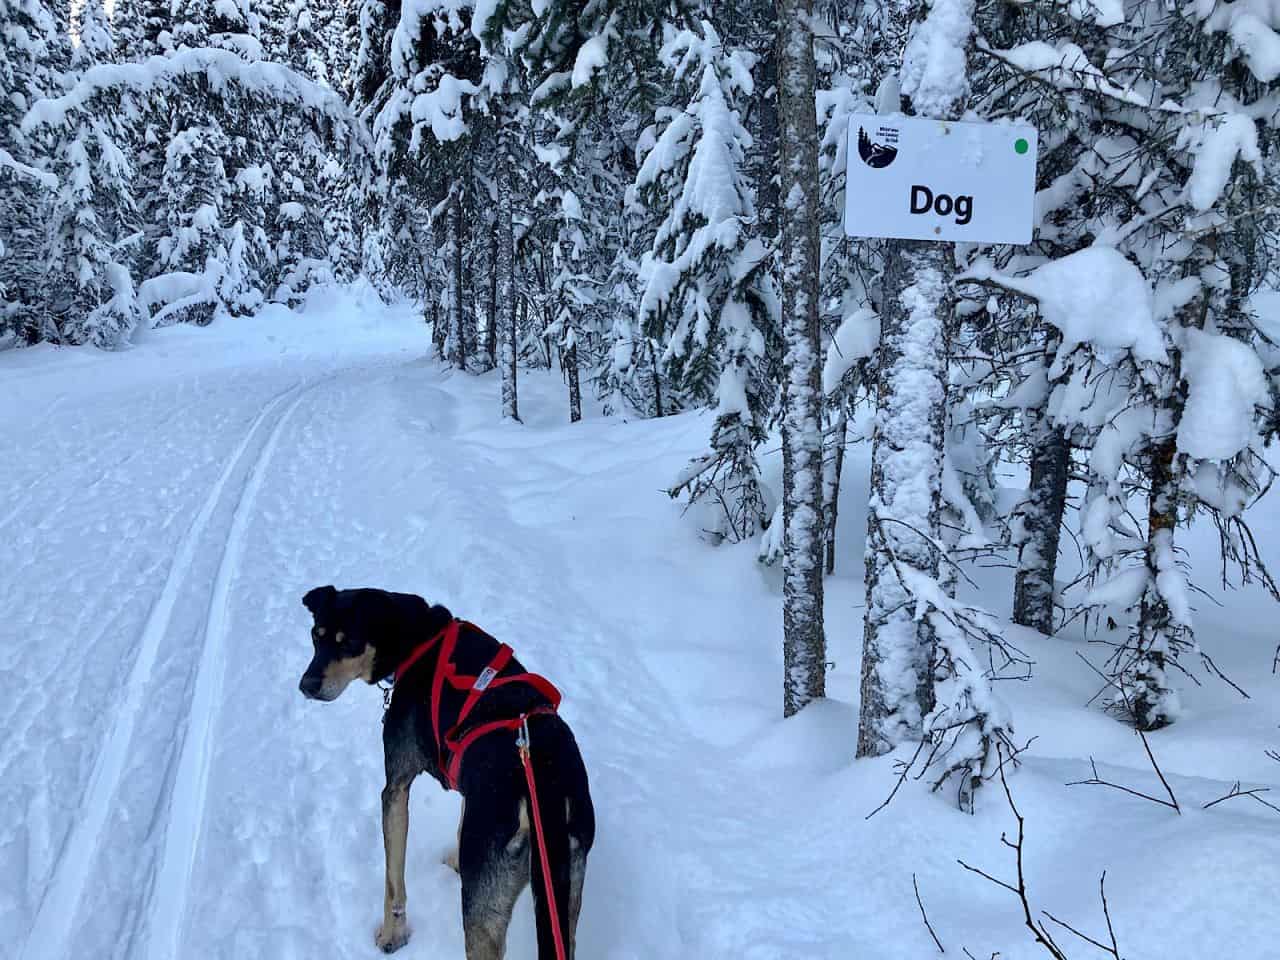 Dark coloured dog with red harness stands beside trail with a sign reading 